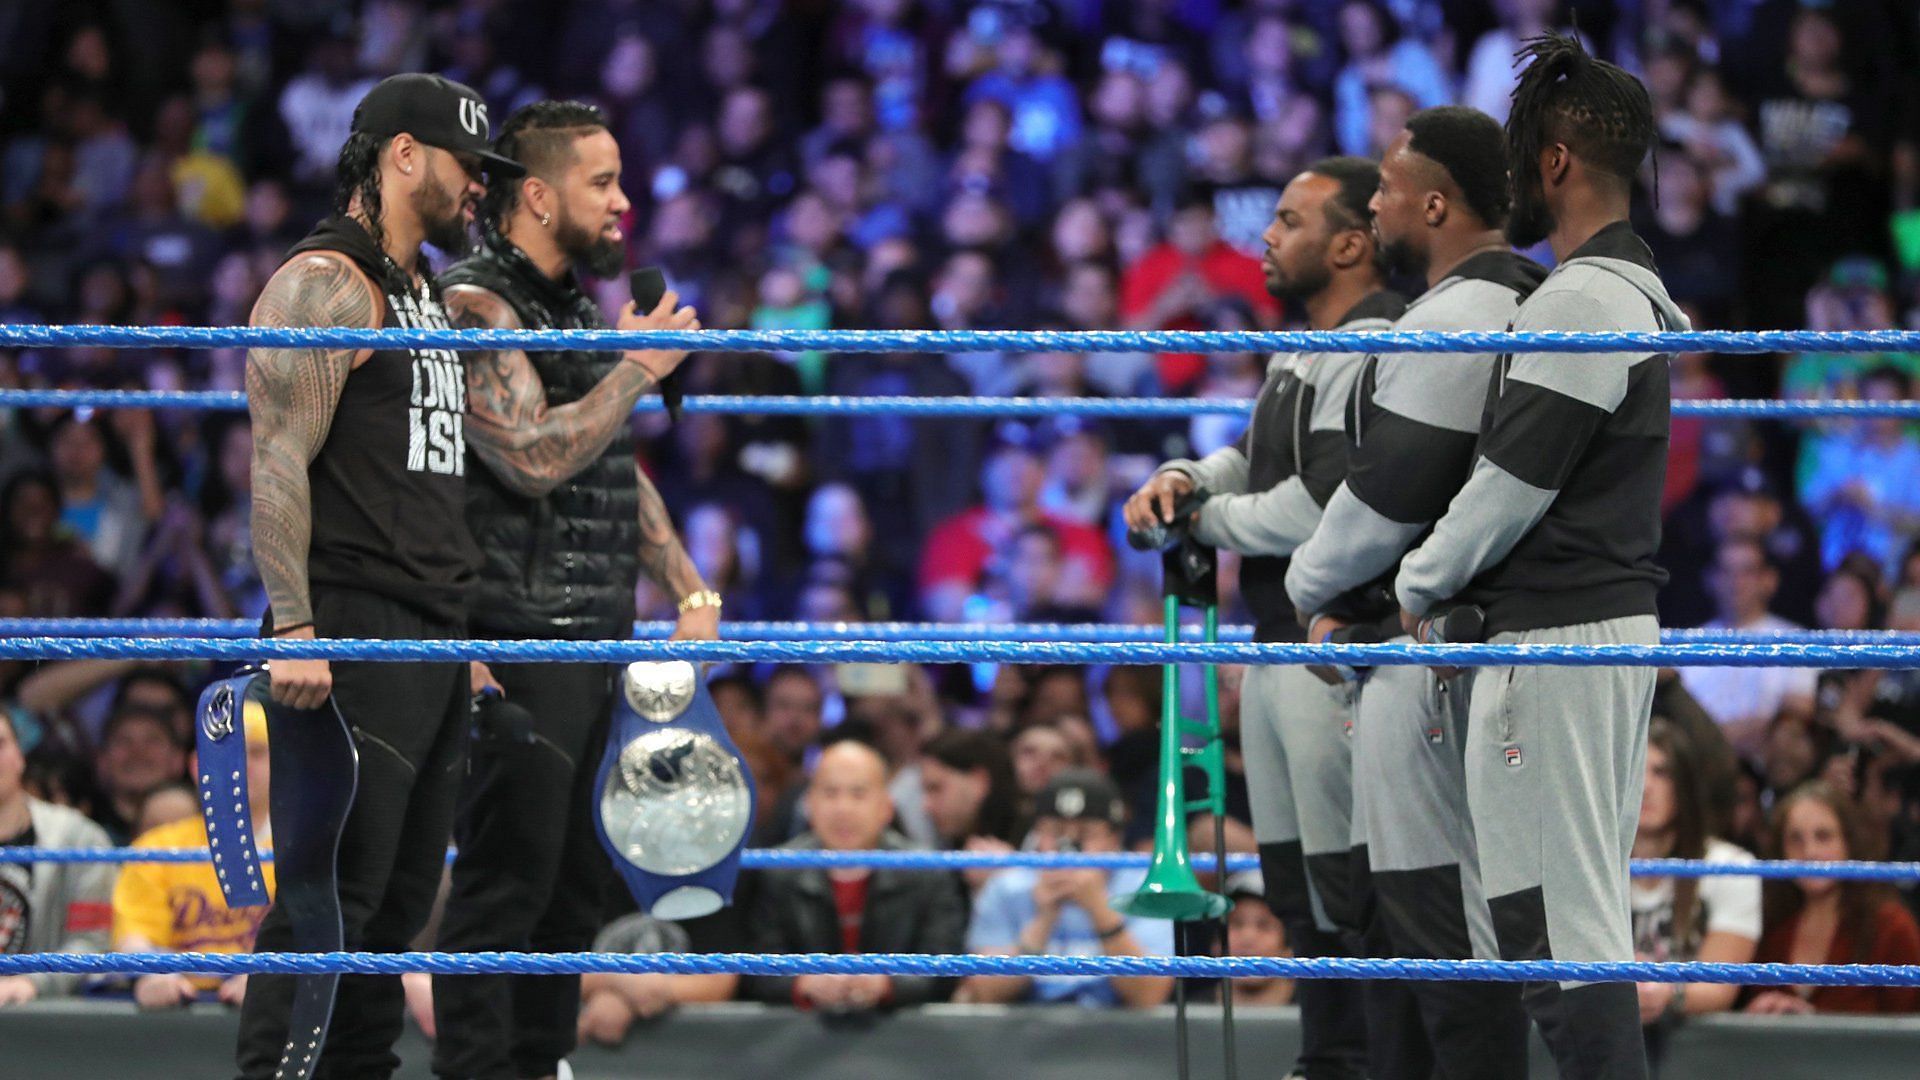 The Usos and The New Day have a great history together